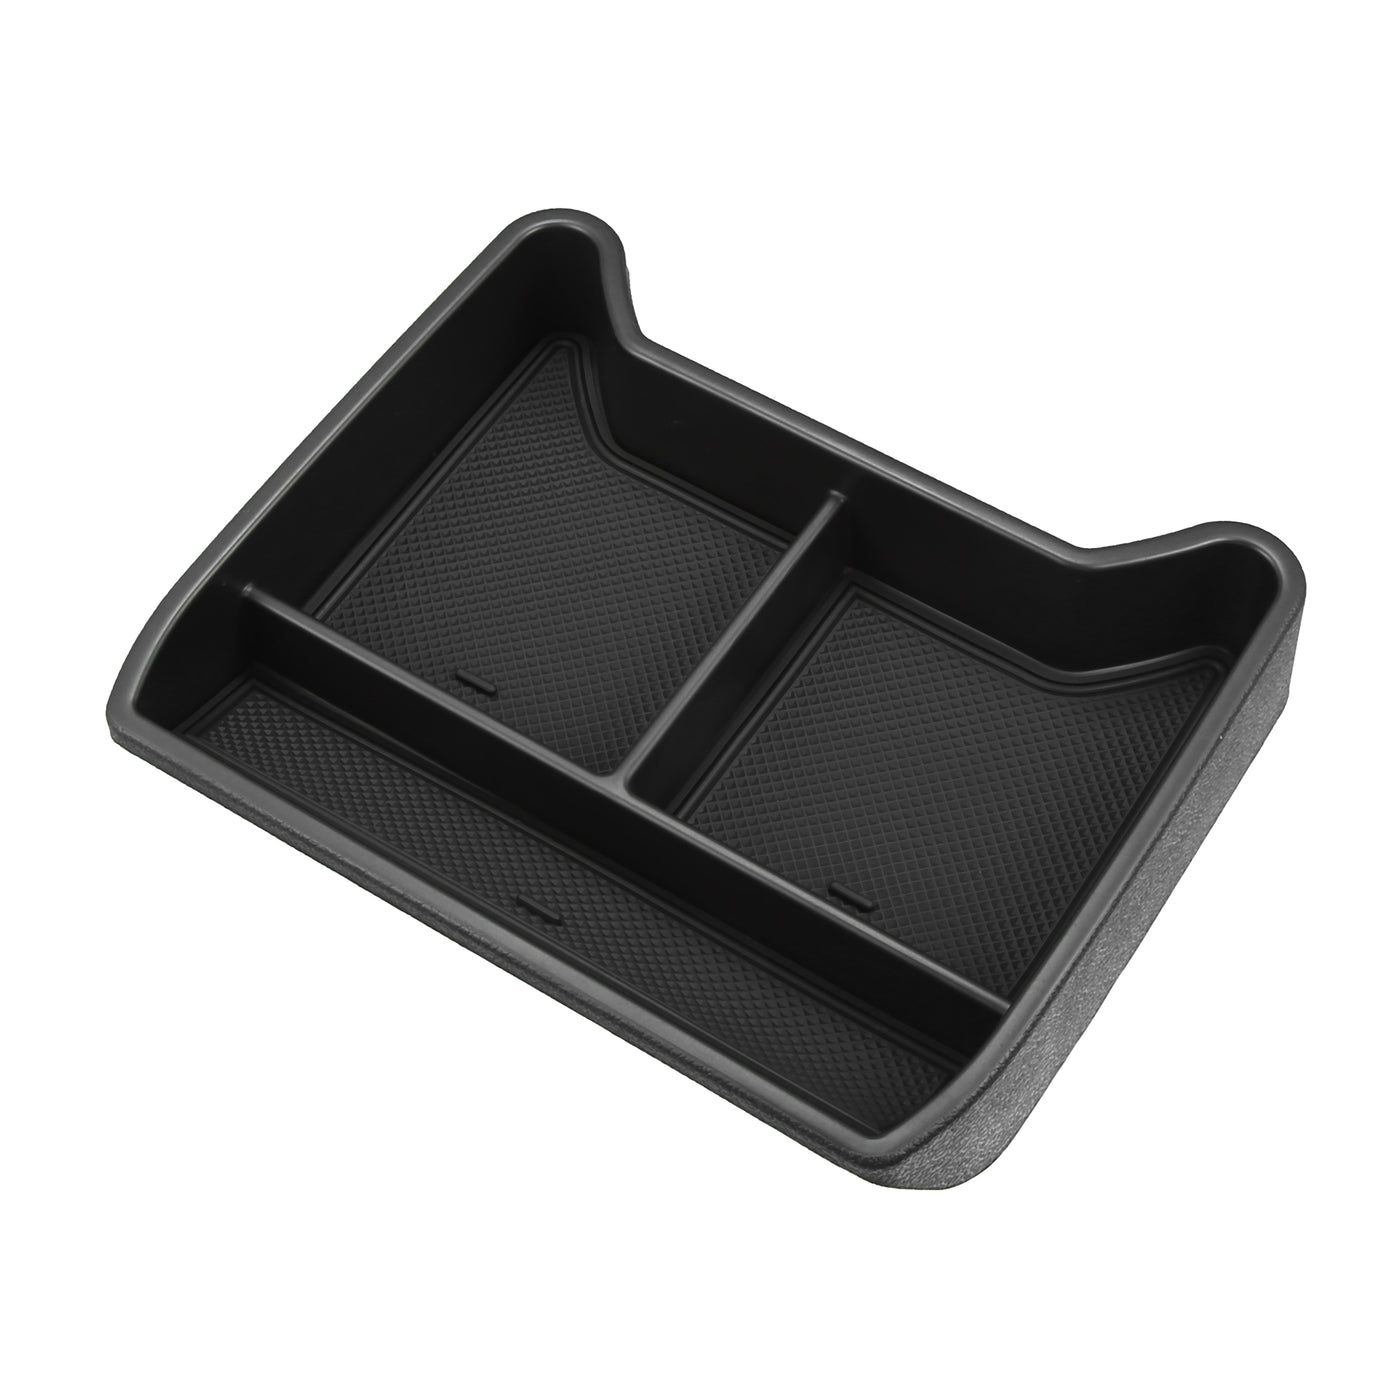 ACROPIX Front Center Console Organizer Tray Fit for VW ID.4 2021 - 2023 - Pack of 1 Black